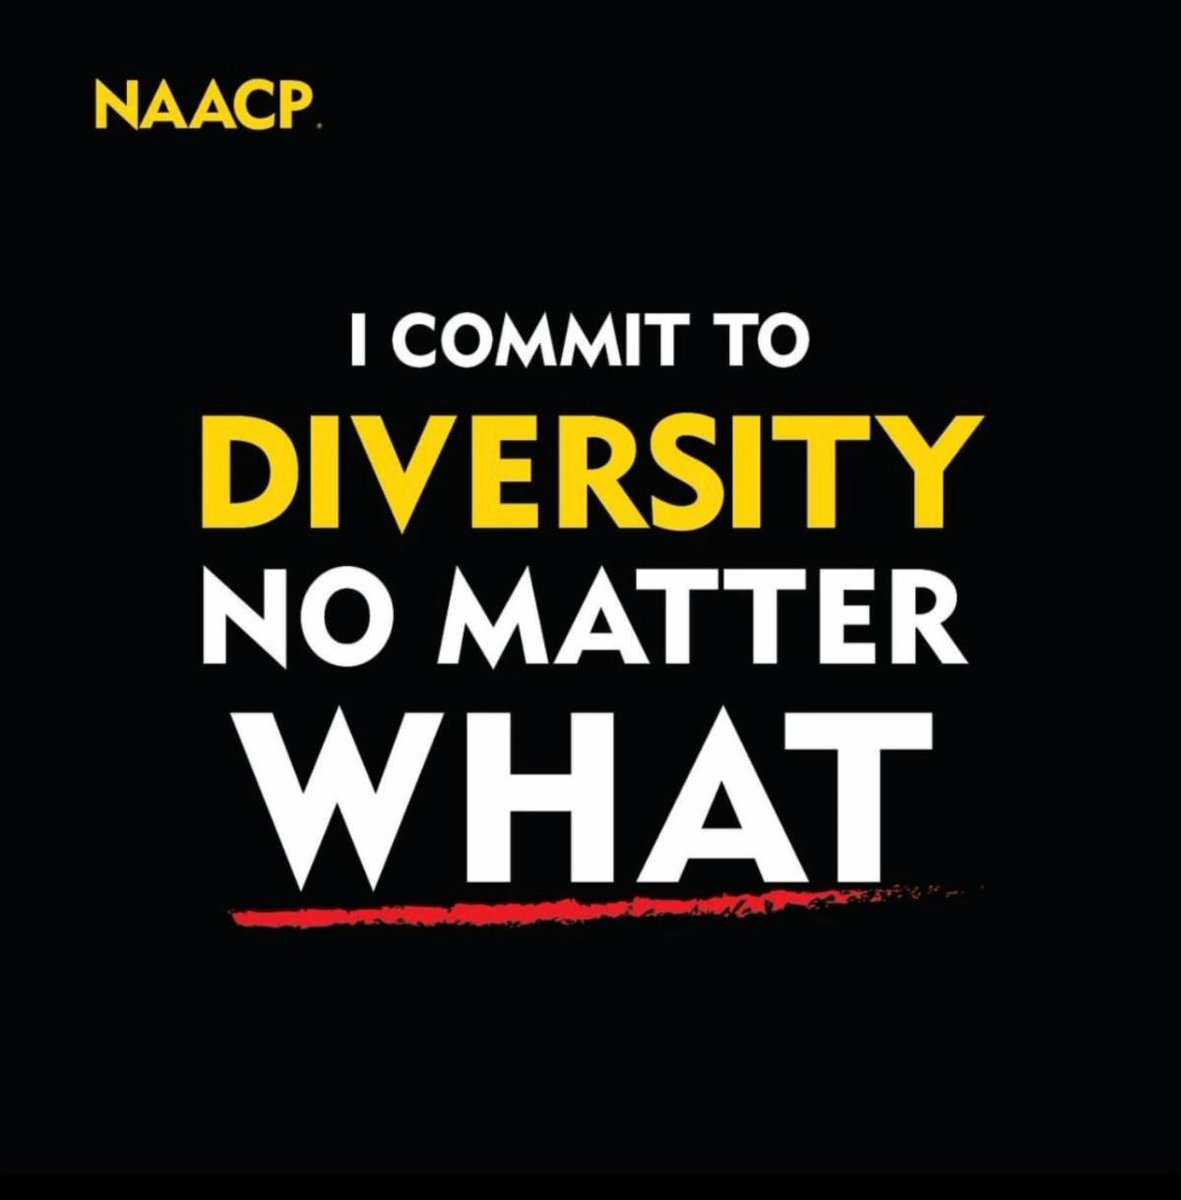 As we await the Supreme Court's decision on affirmative action, we will continue to advocate for every Black American, to make sure our community has equal opportunity to #thrive.
Visit the link below to sign our petition. #DiversityNoMatterWhat
naacp.org/actions/divers…